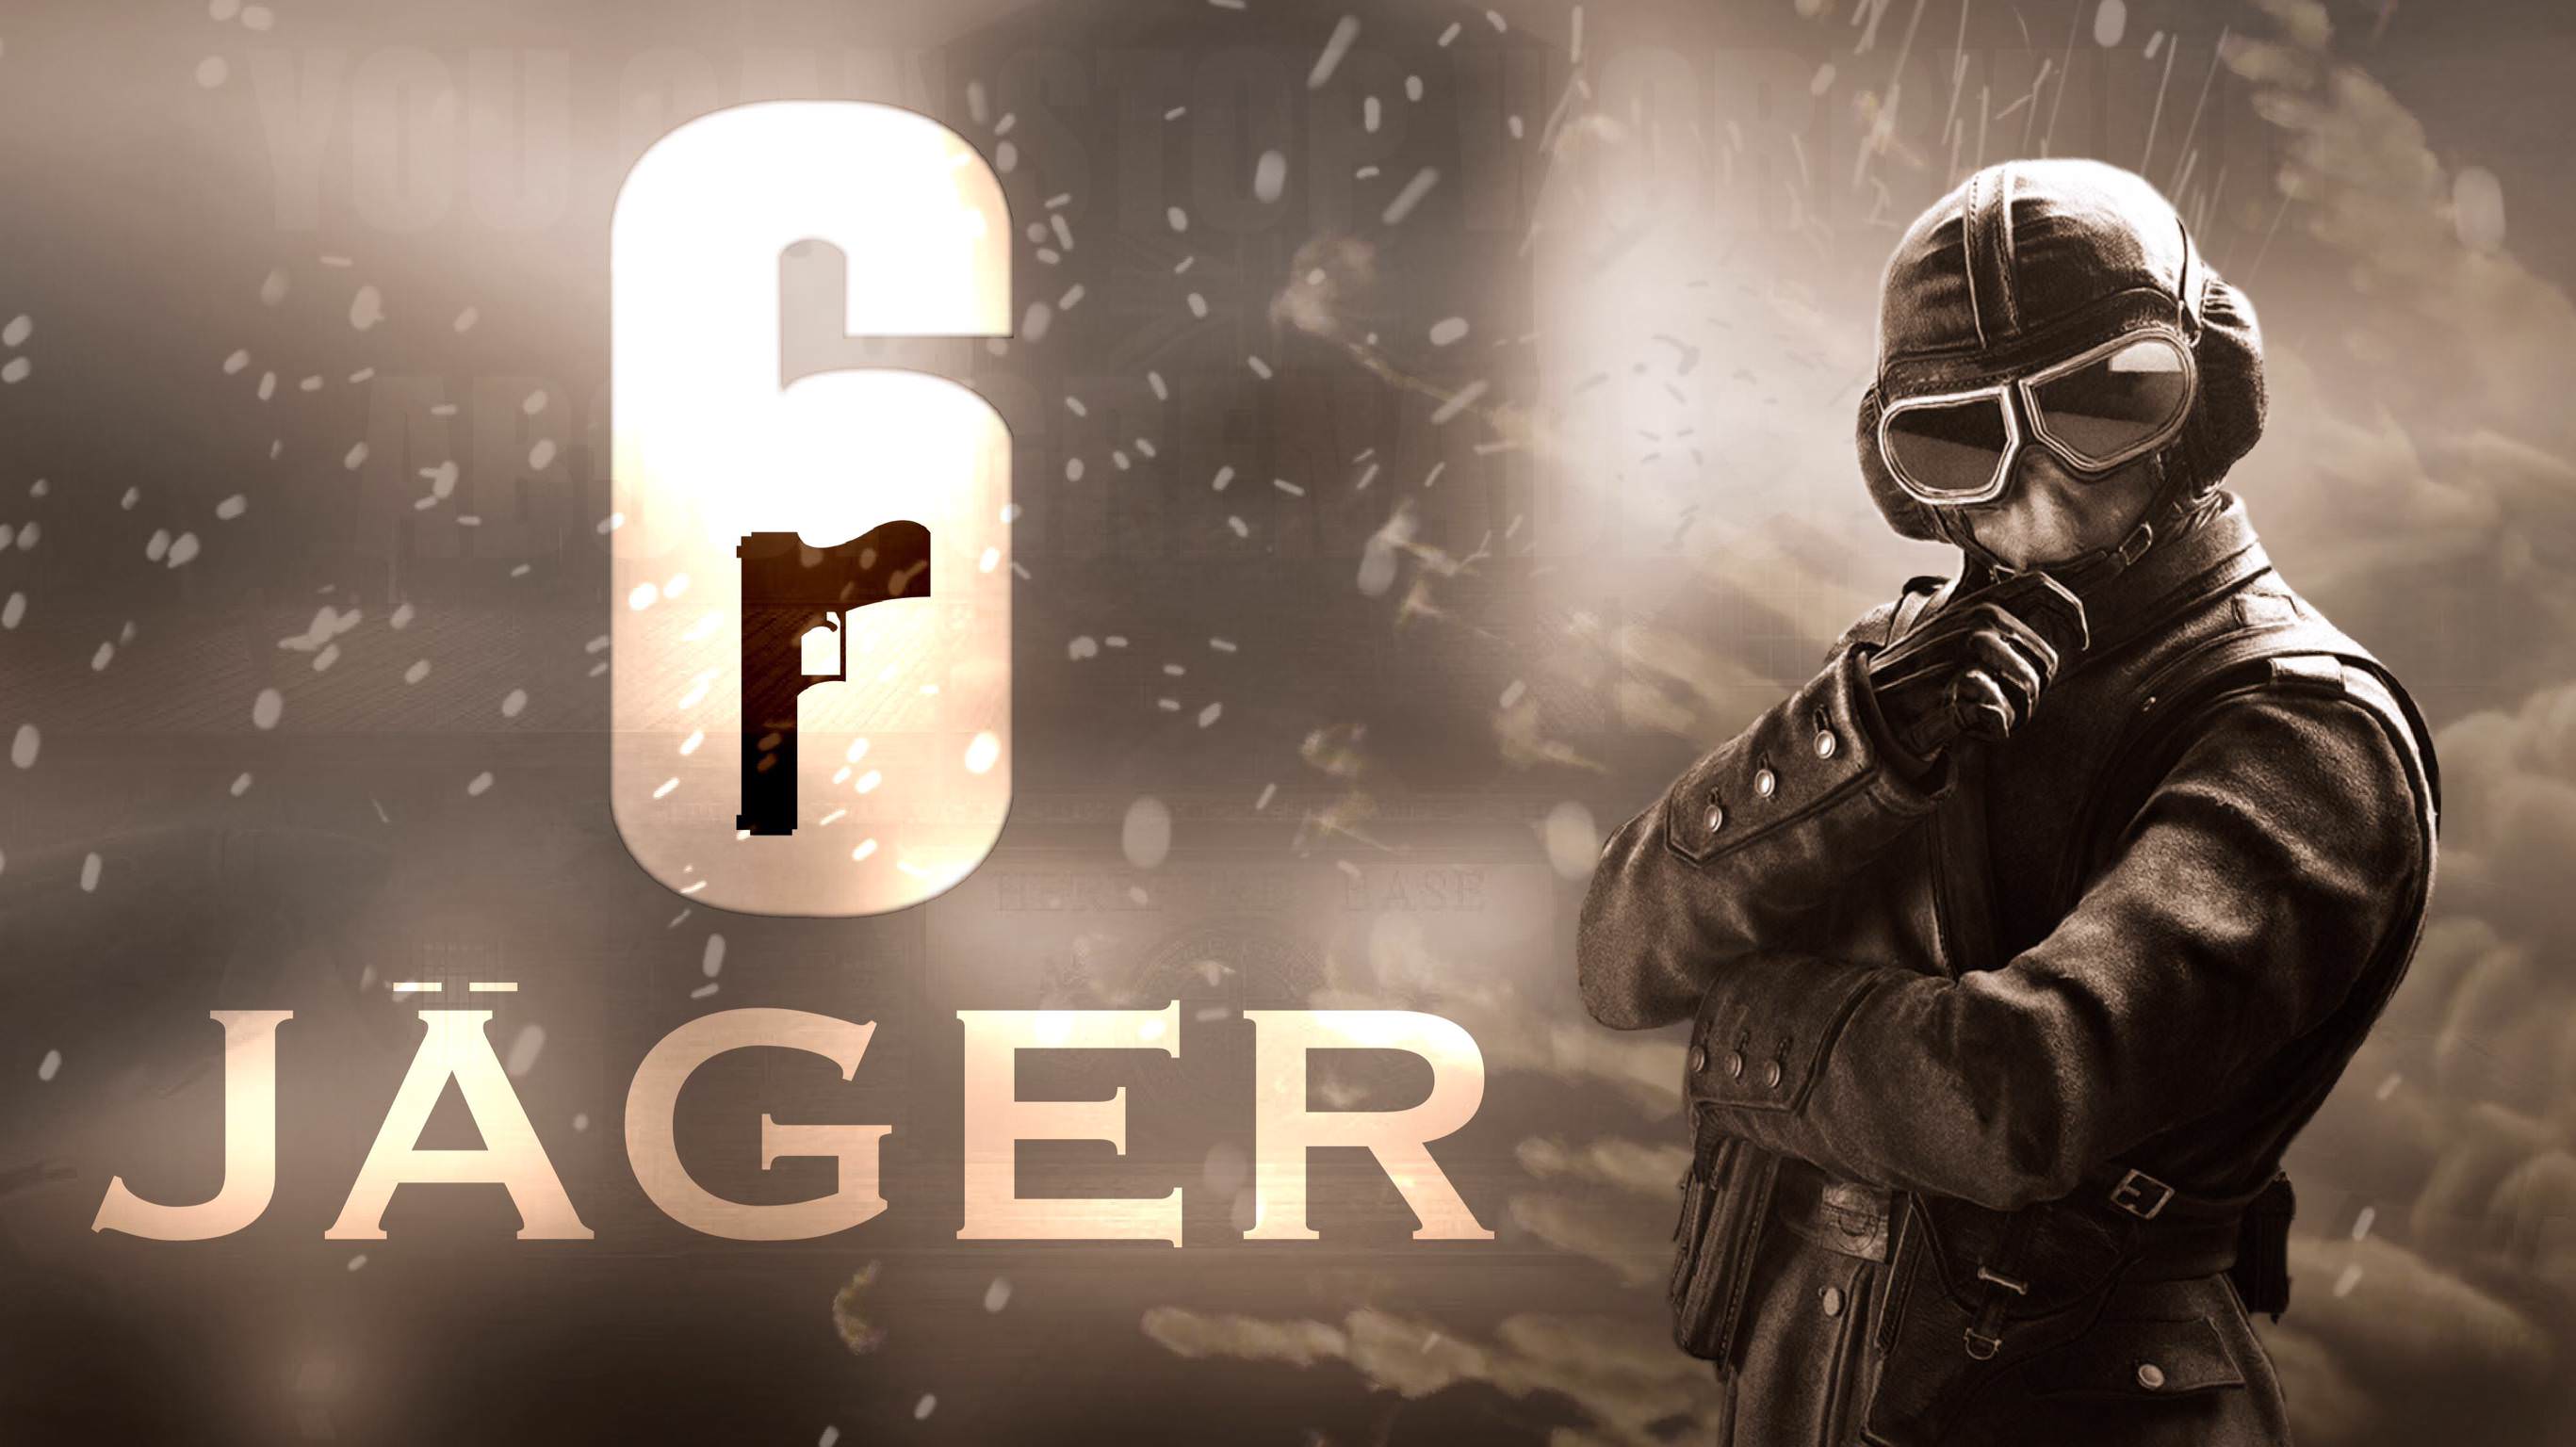 Jager wallpaper I made feel free to use or not but I liked making it :)